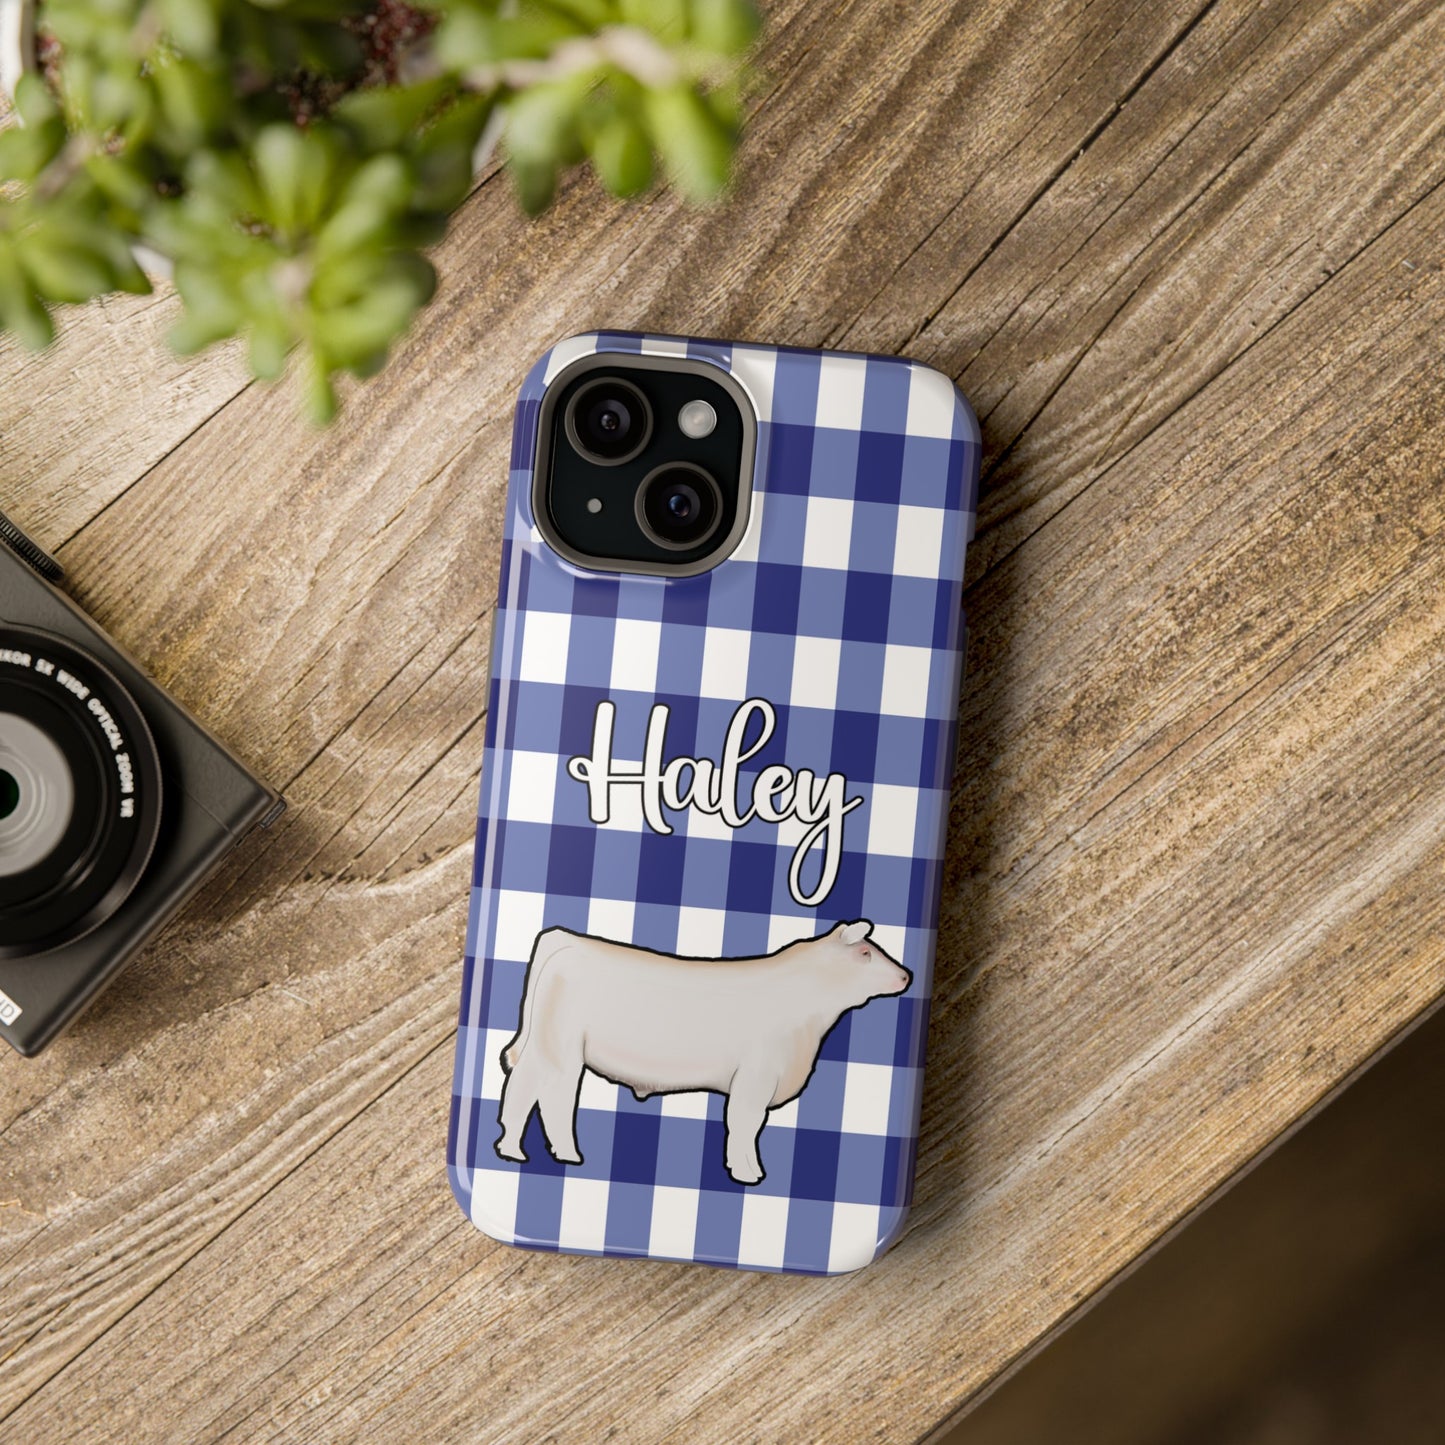 MagSafe iPhone Cases - Livestock Show Charolaise Steer - iPhone Cow Phone Cases